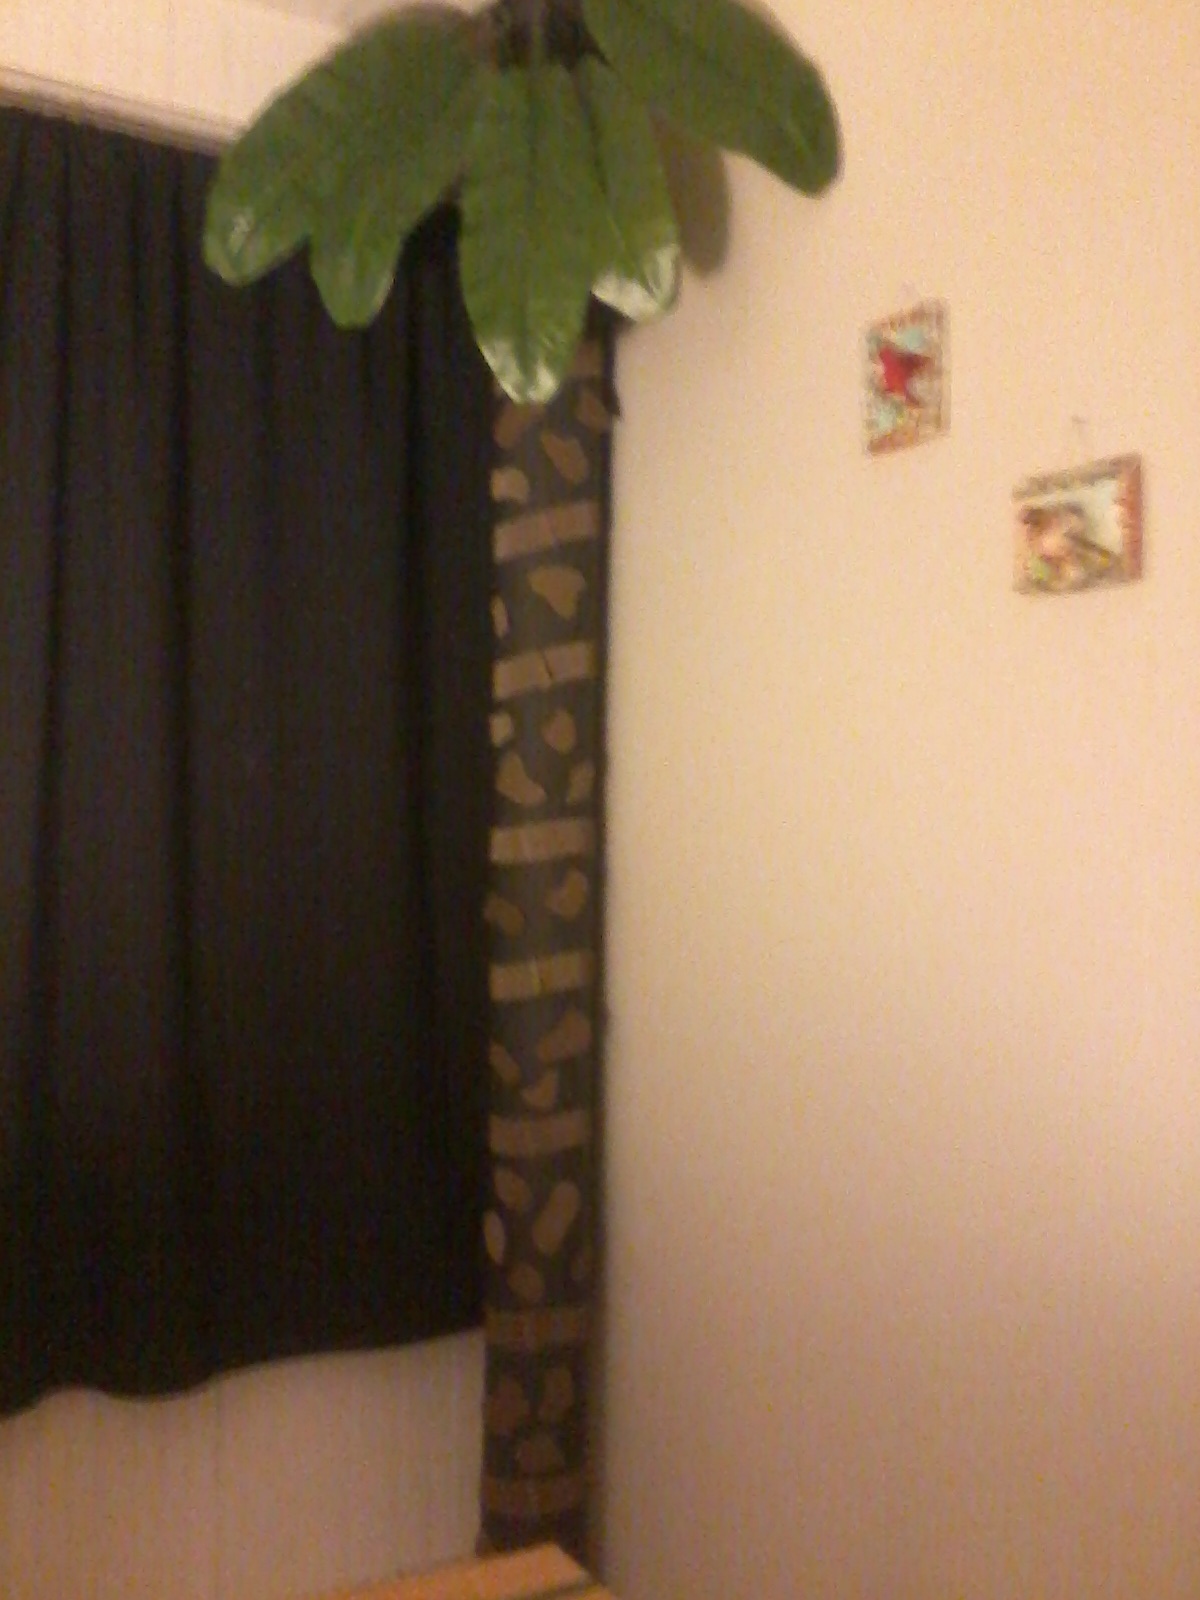 This is another picture of the final product, which is a tree!